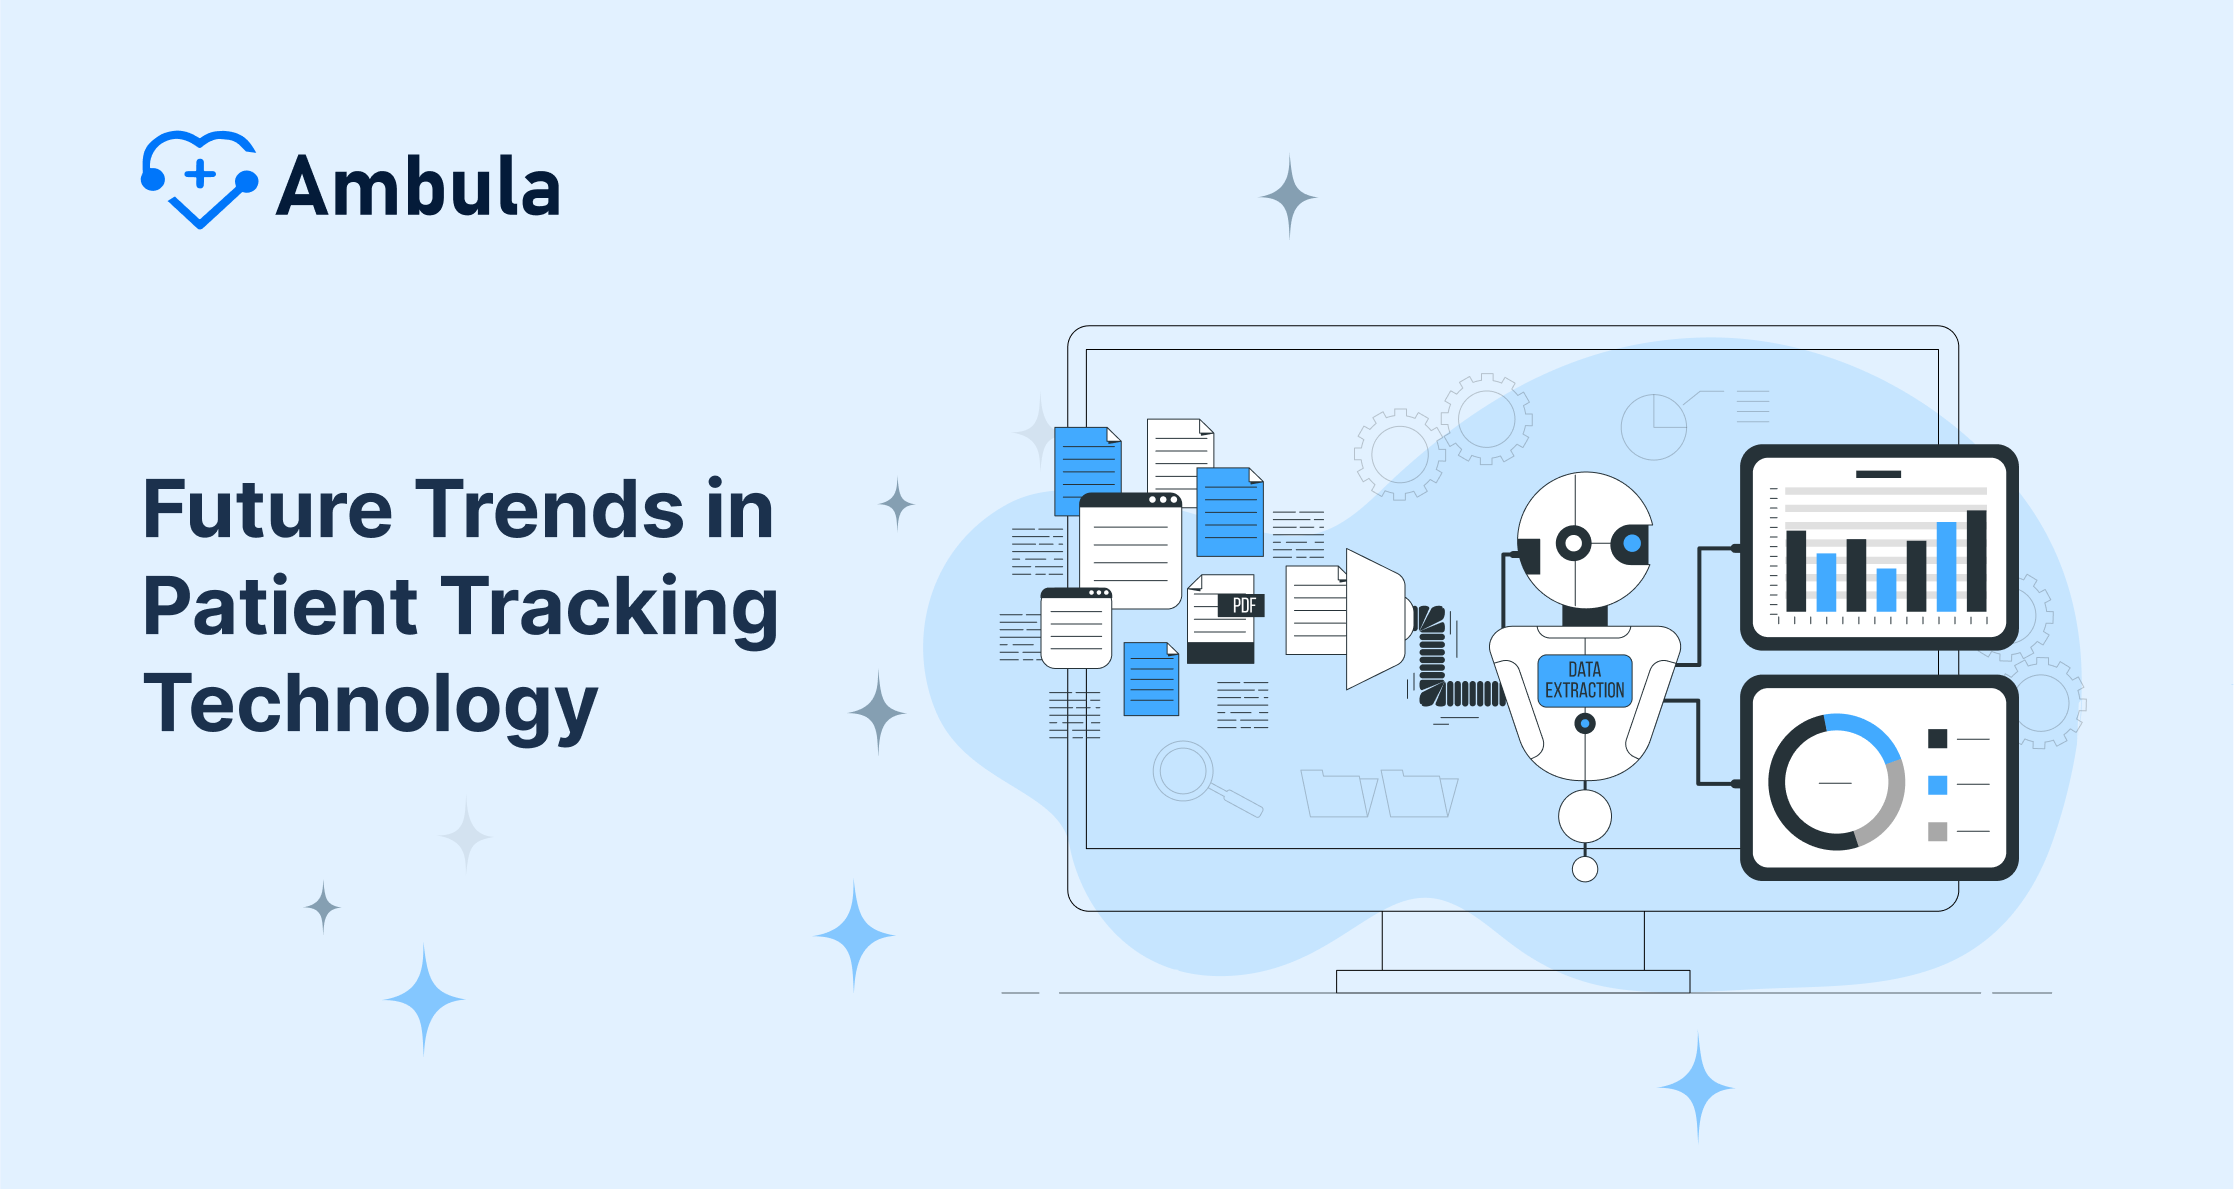 Future Trends in Patient Tracking Technology